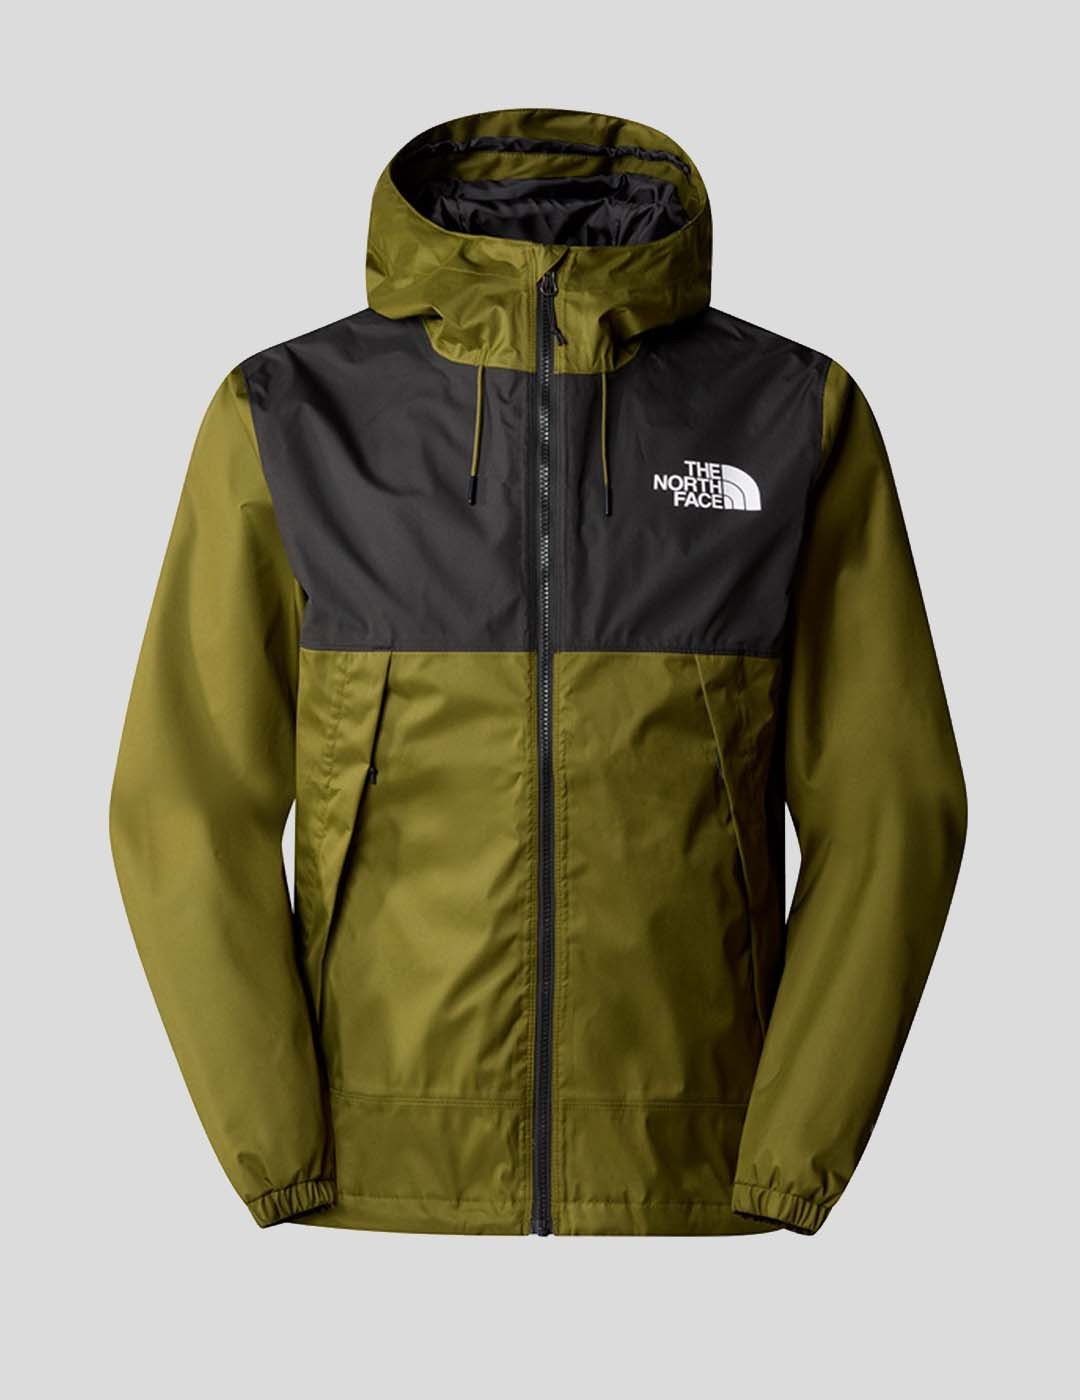 CHAQUETA THE NORTH FACE 1990 MOUNTAIN Q JACKET  FOREST OLIVE